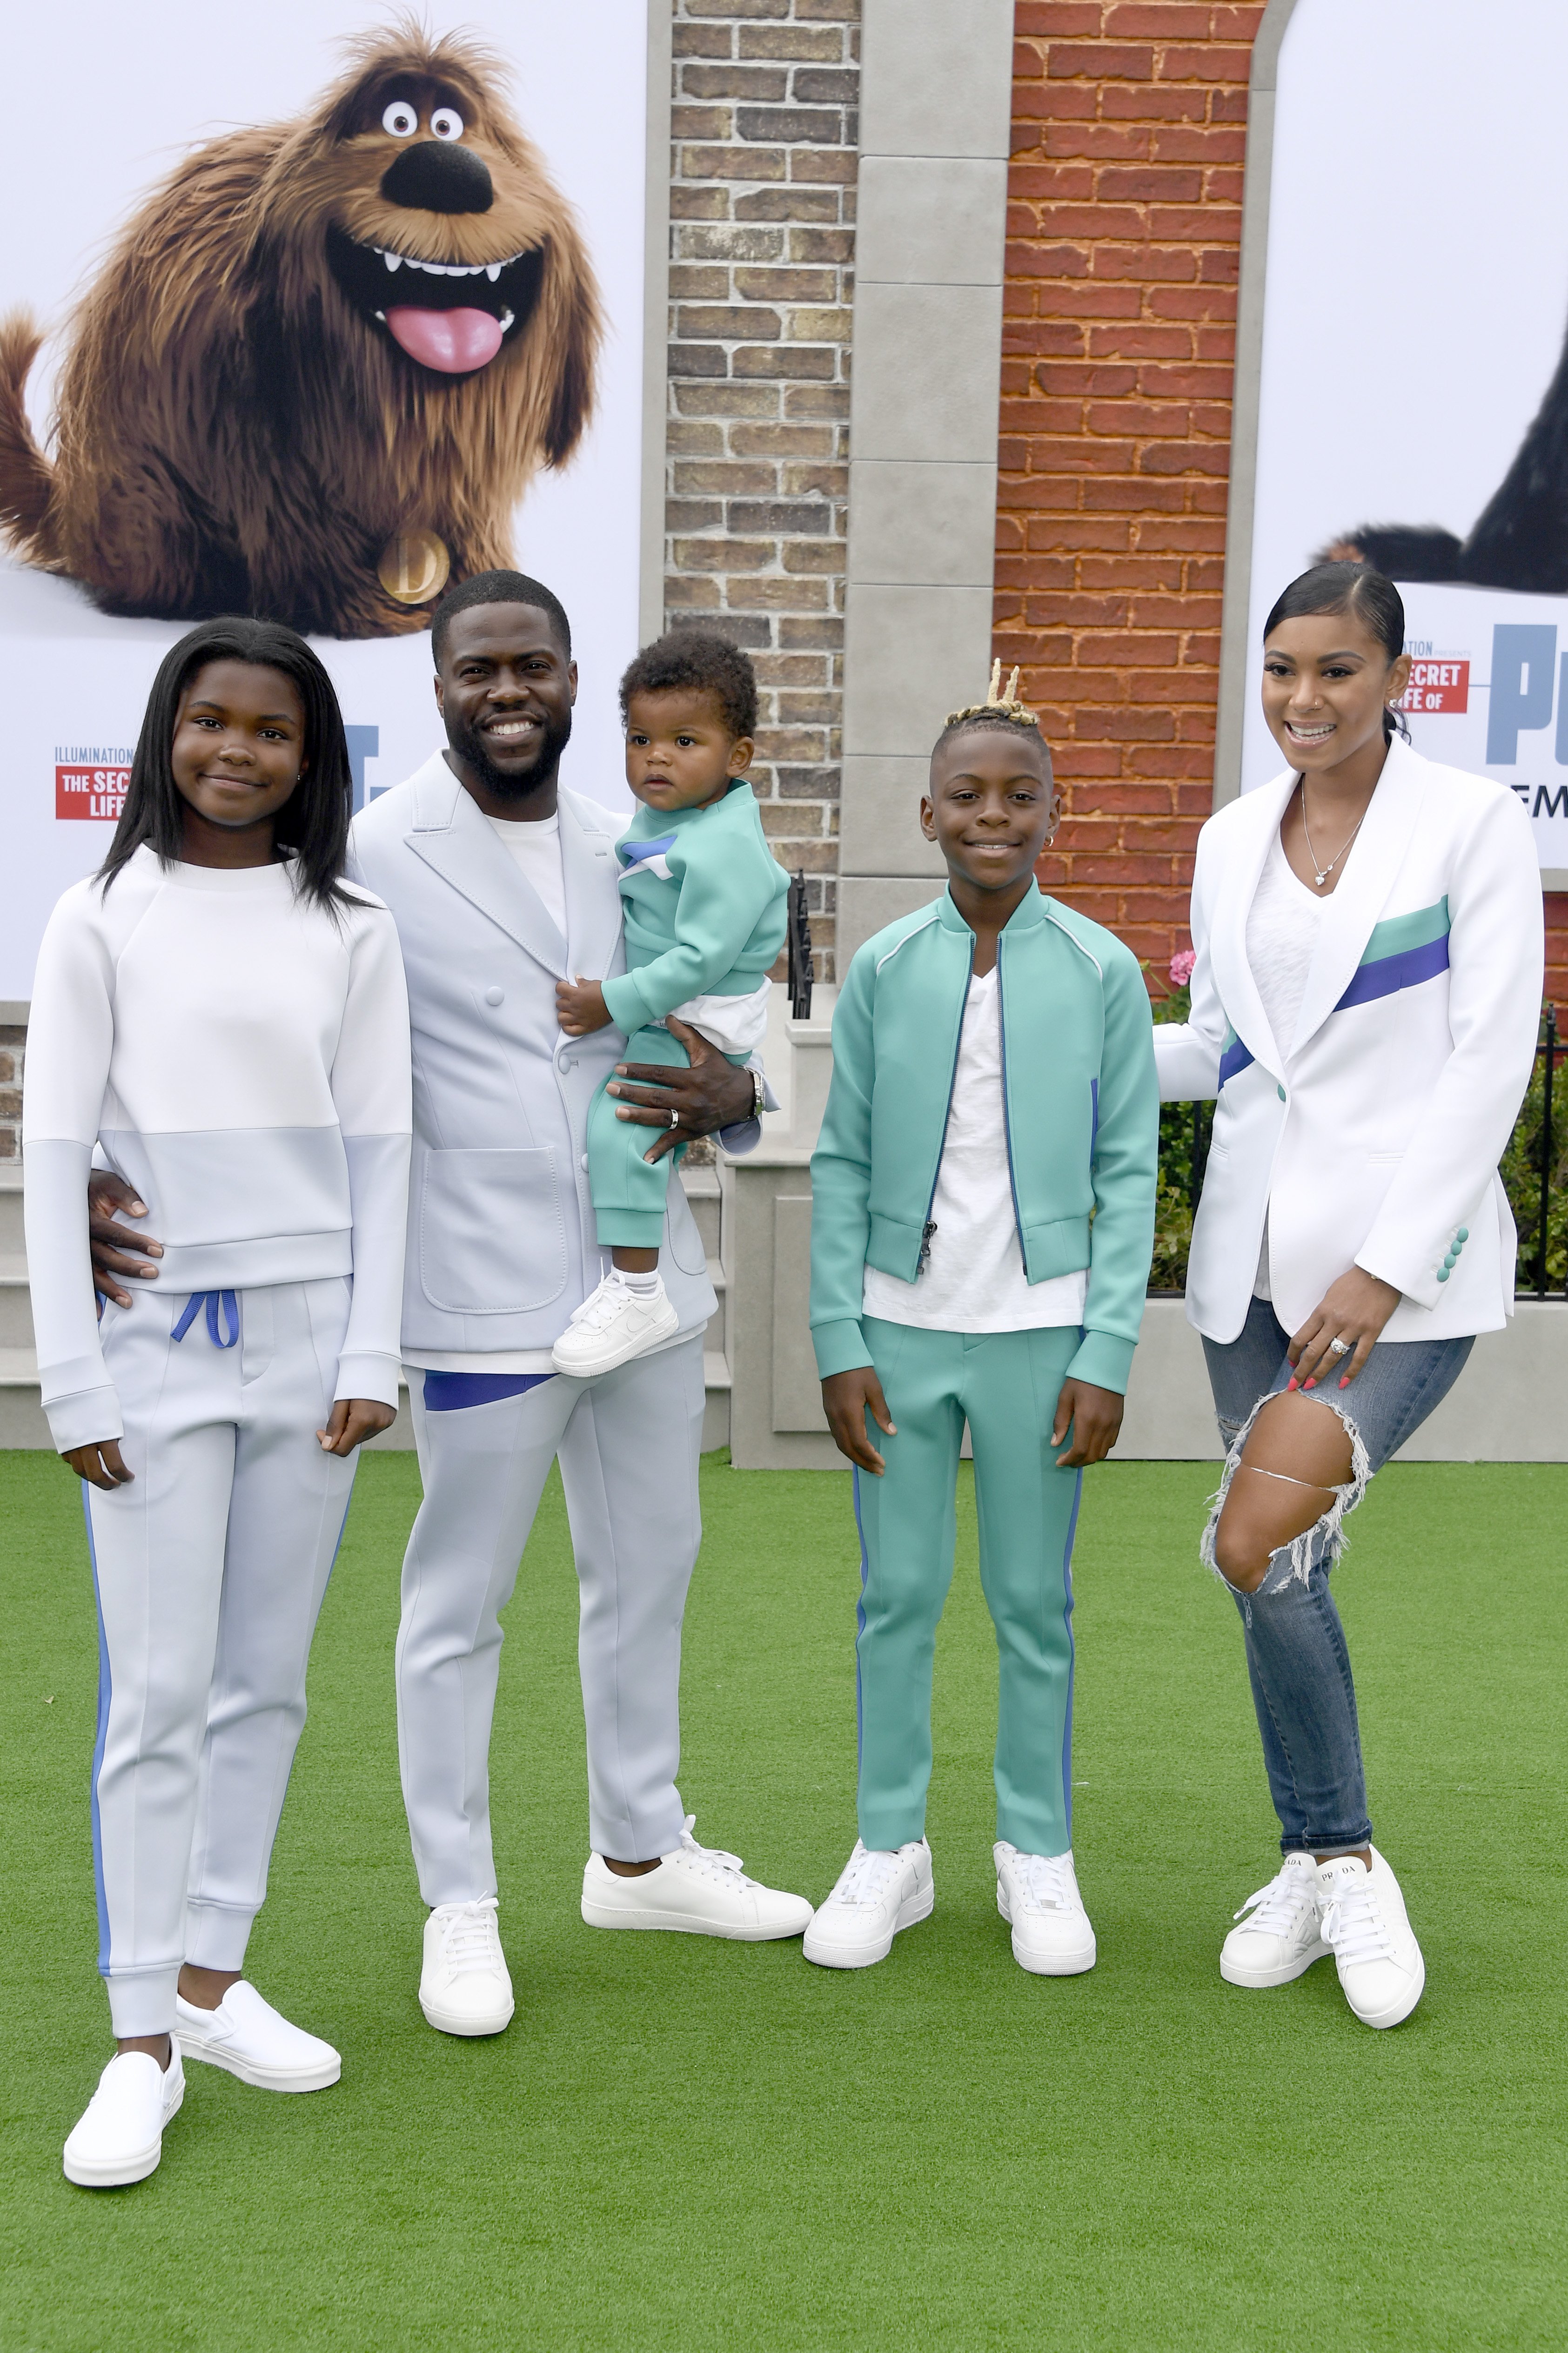 Eniko Hart, Heaven Hart, Hendrix Hart, Kenzo Hart, and Kevin Hart arrive for the premiere of "The Secret Life of Pets 2" on June 2, 2019 | Photo: Getty Images  